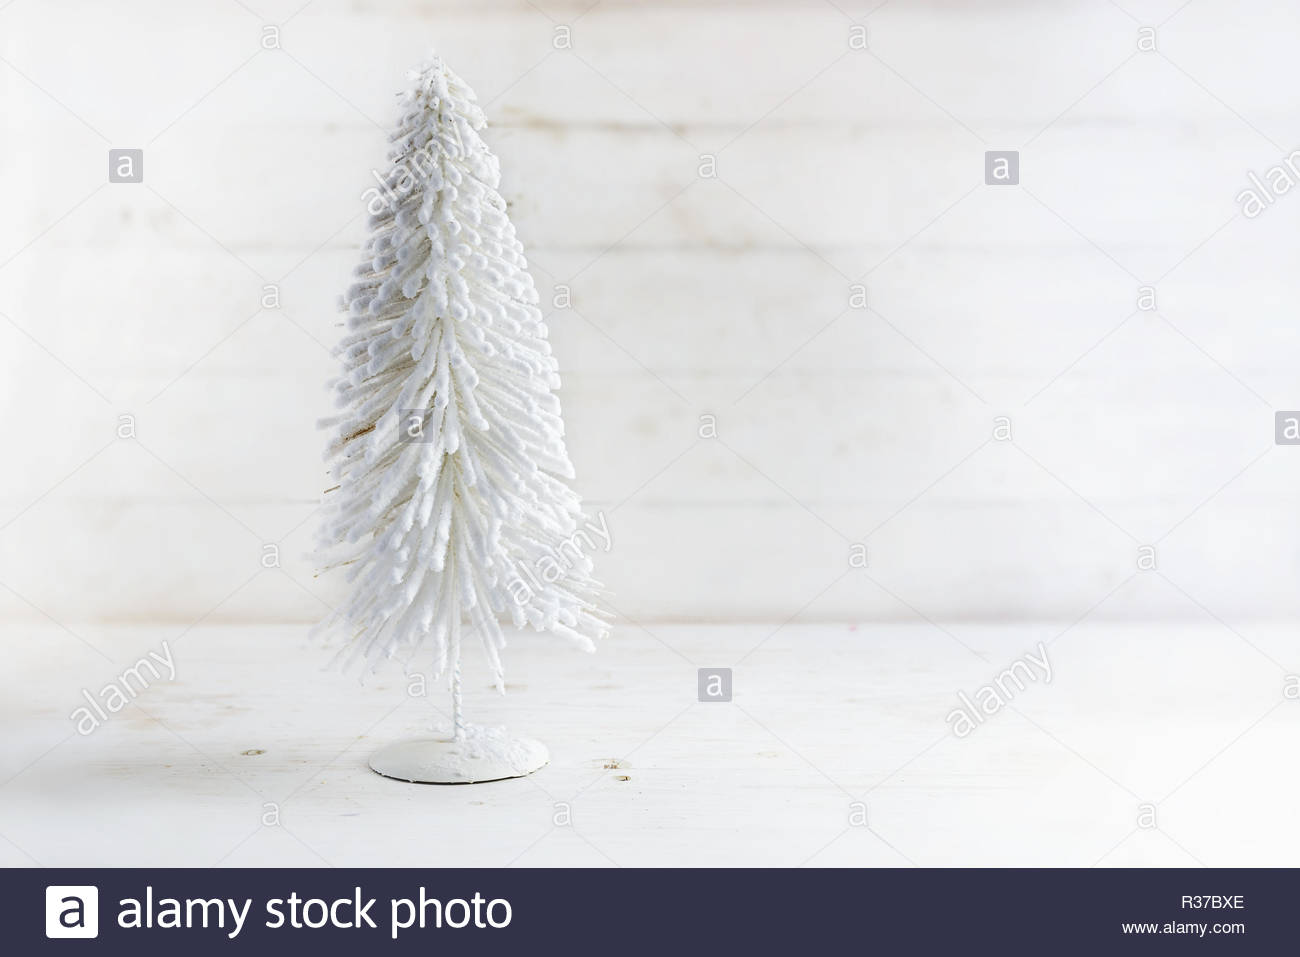 White Artificial Christmas Tree From Flocked Wire On A Rustic